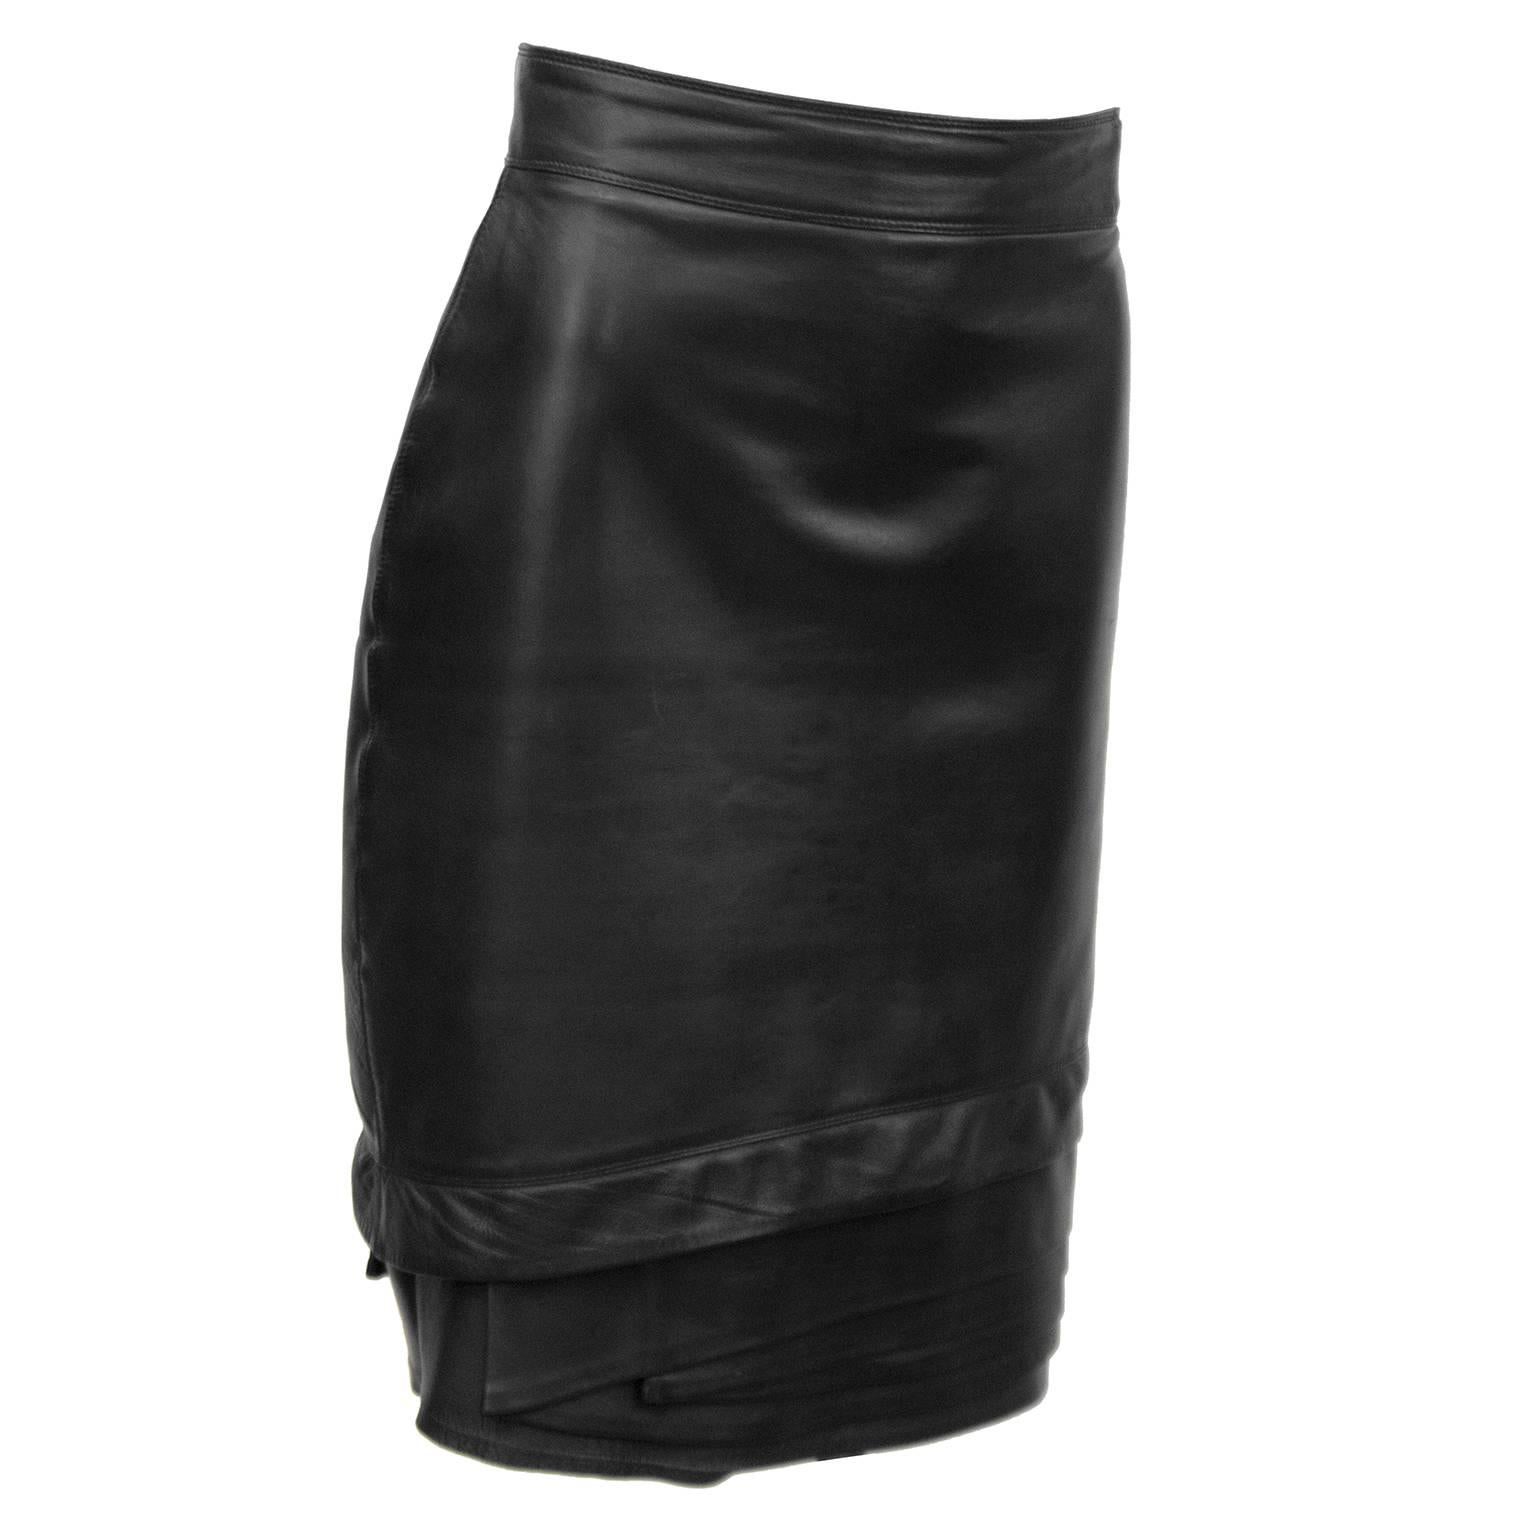 Black leather Gianni Versace skirt from the 1980s. The skirt has a banded waist and a beautiful tiered detail on the hem. Back zip, fully lined. In excellent condition. 

Waist 28" Hips 34.5" Length 23"